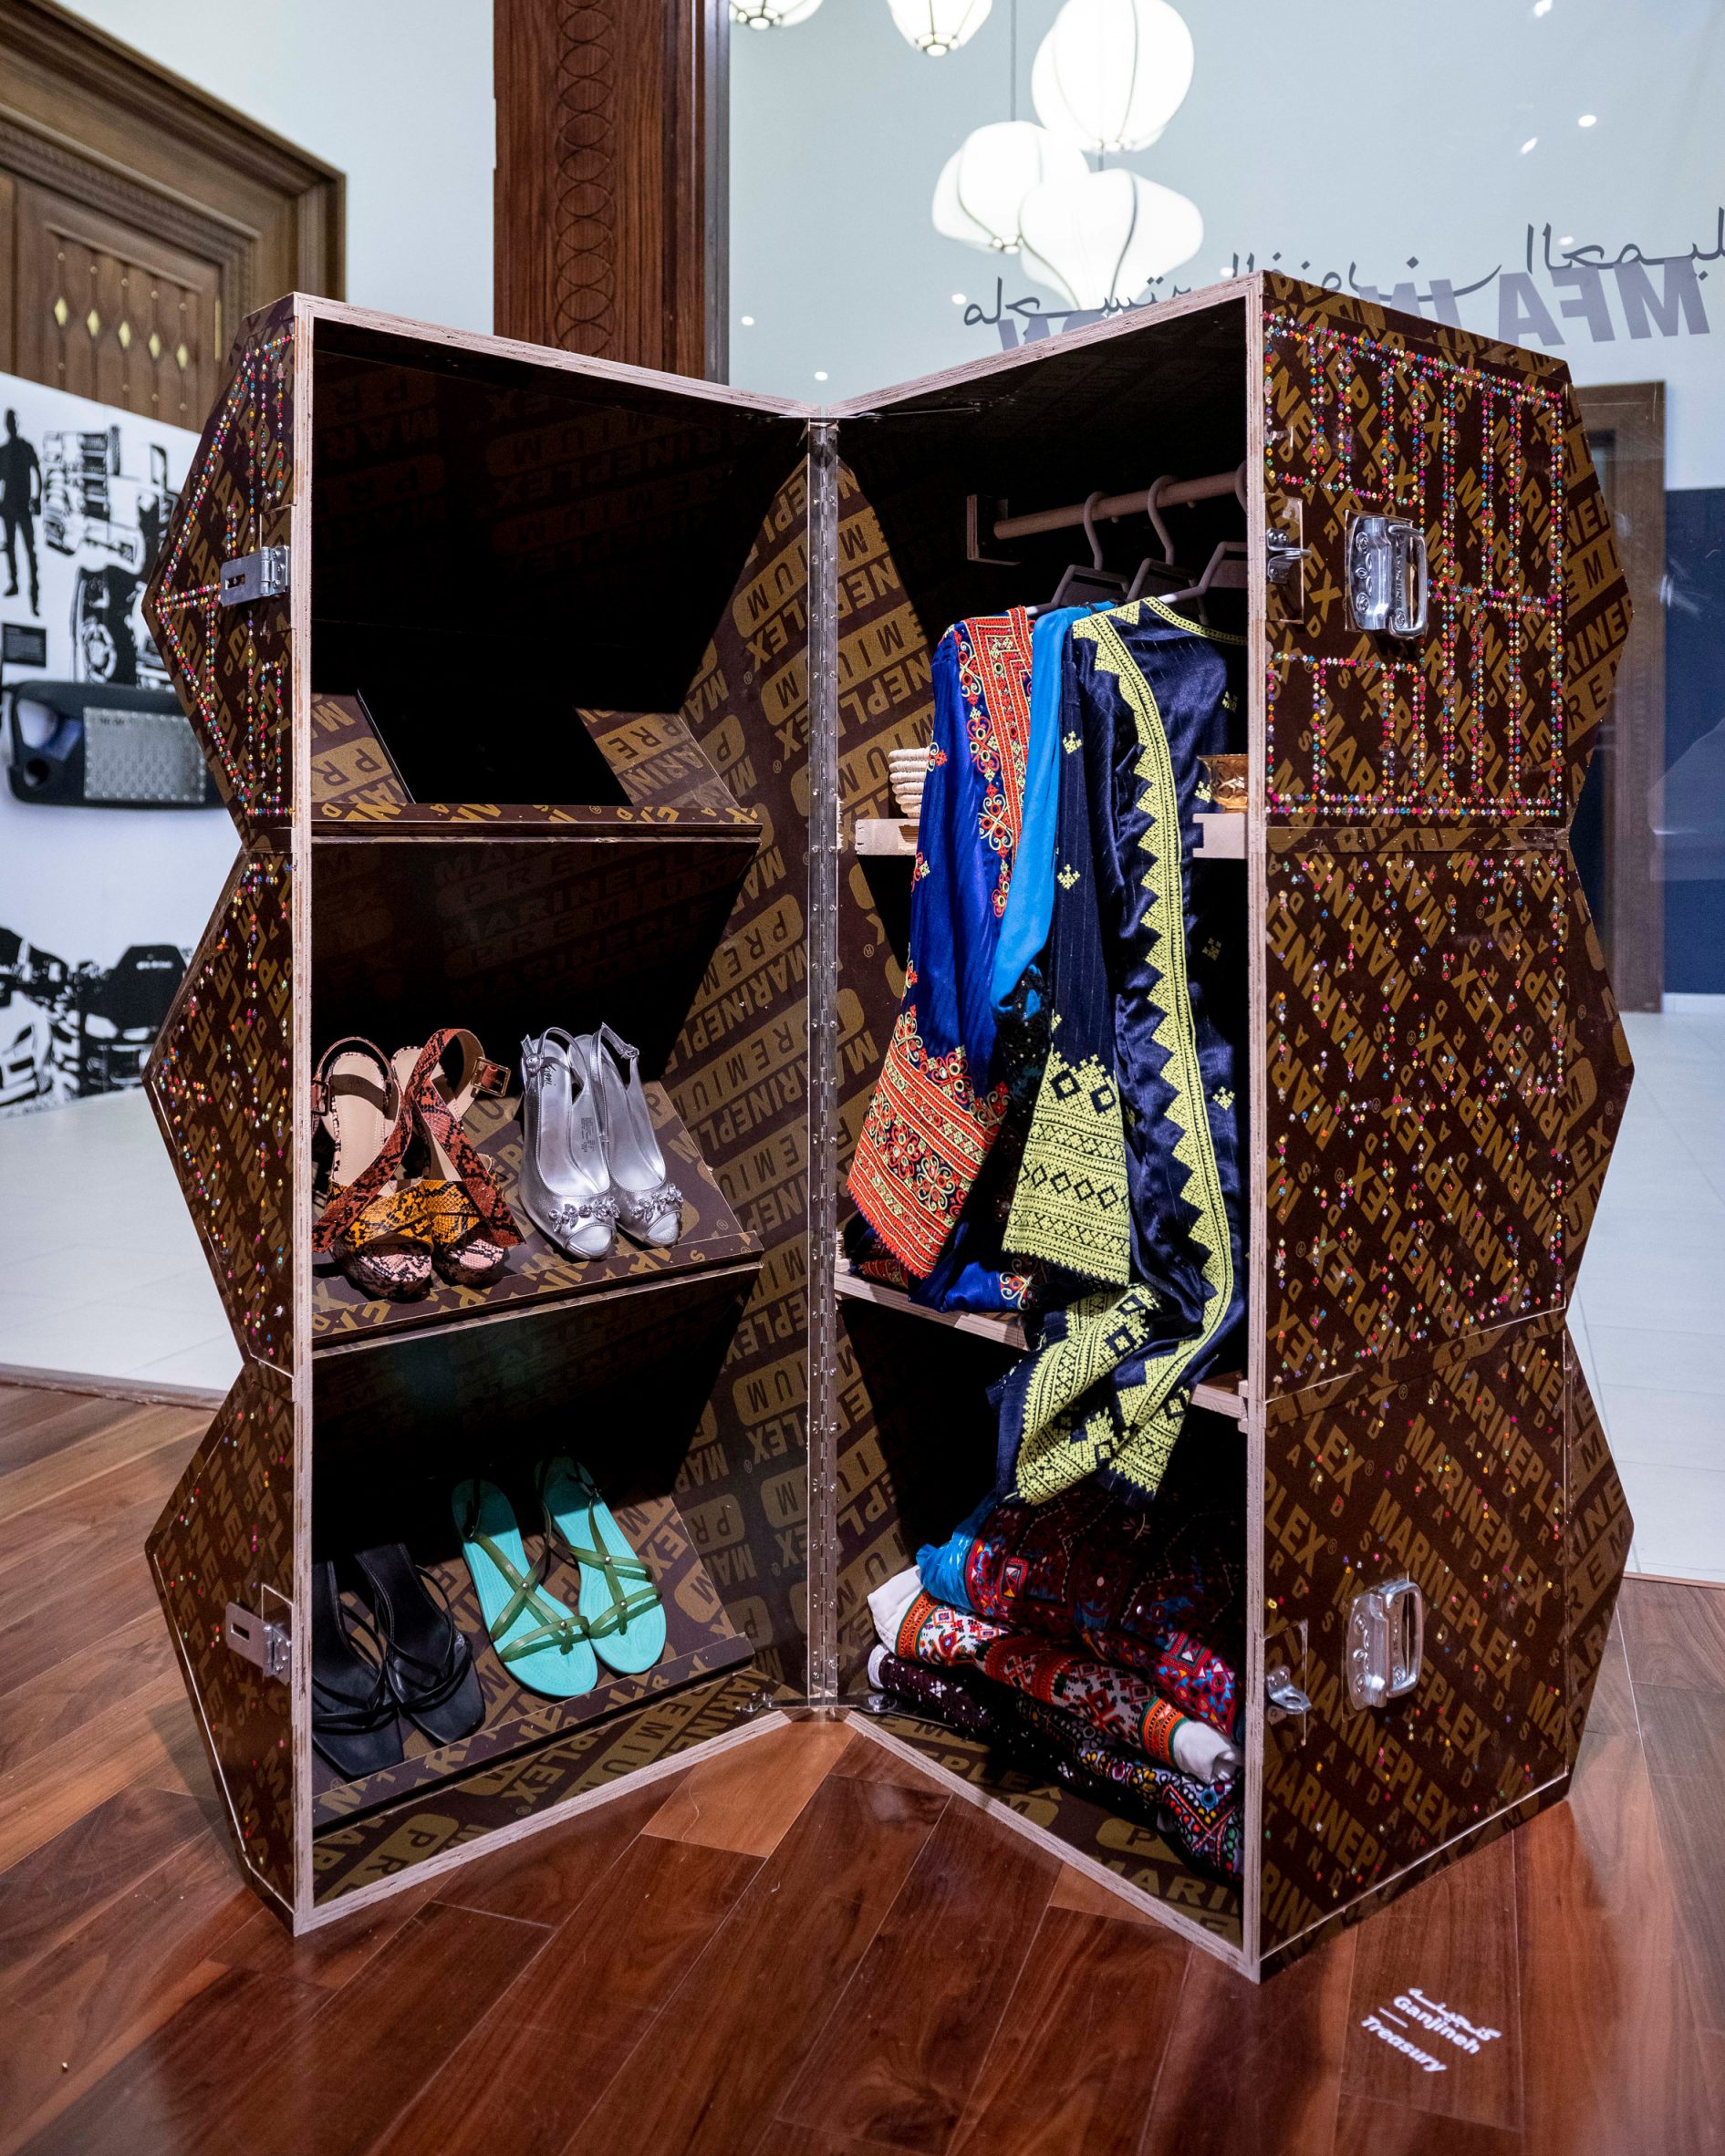 A wooden cabinet with three shelves filled with shoes and clothing